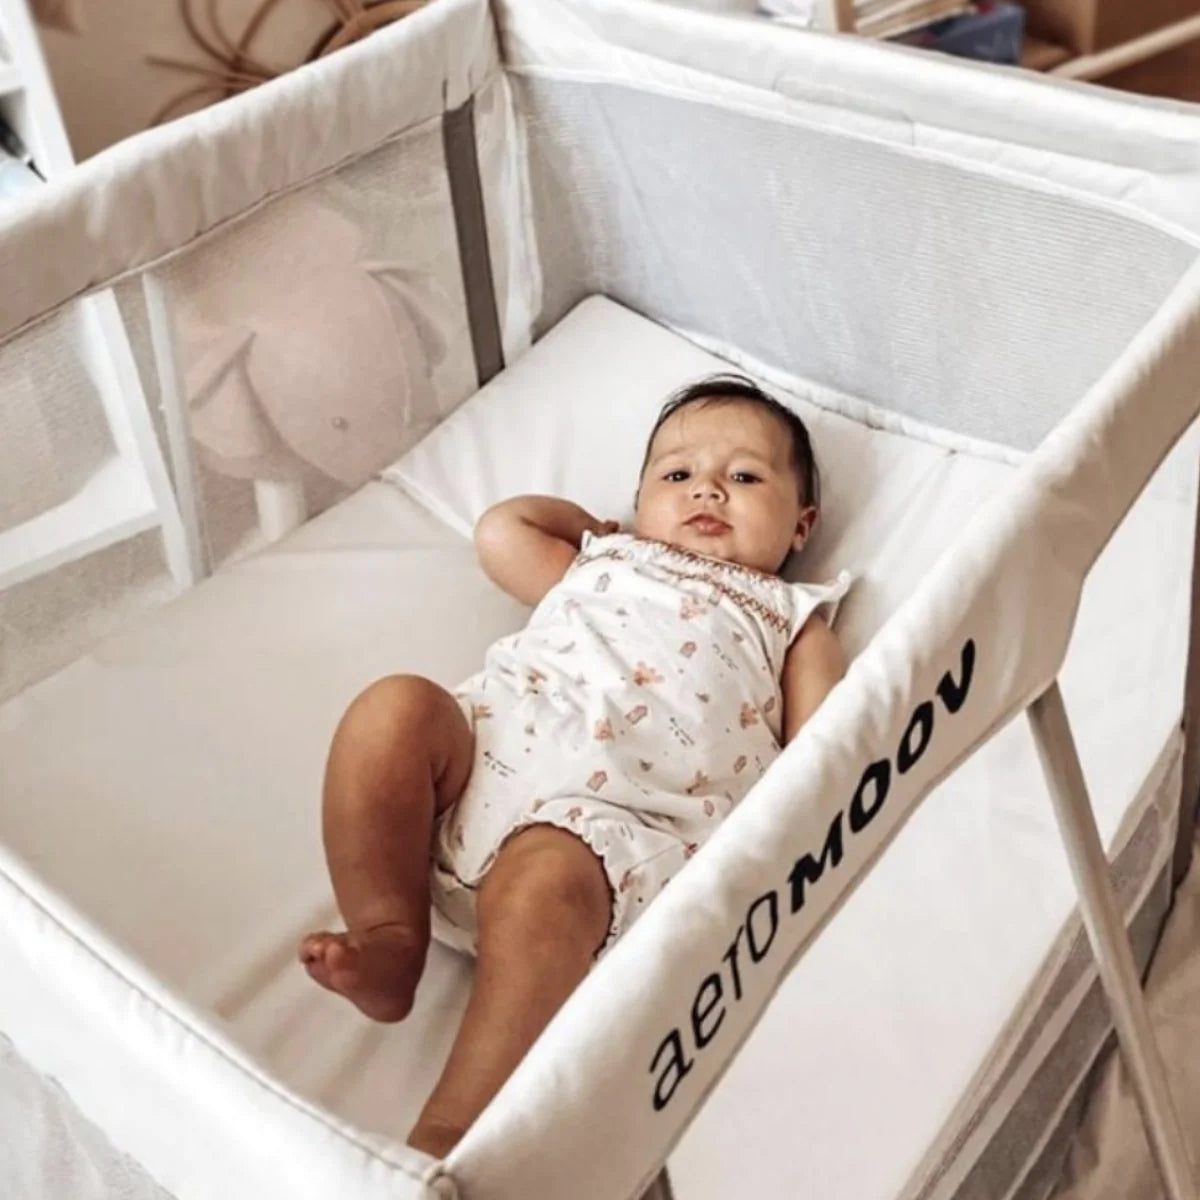 Aeromoov Instant Travel Cot - Sand - Tiny Tots Baby Store 